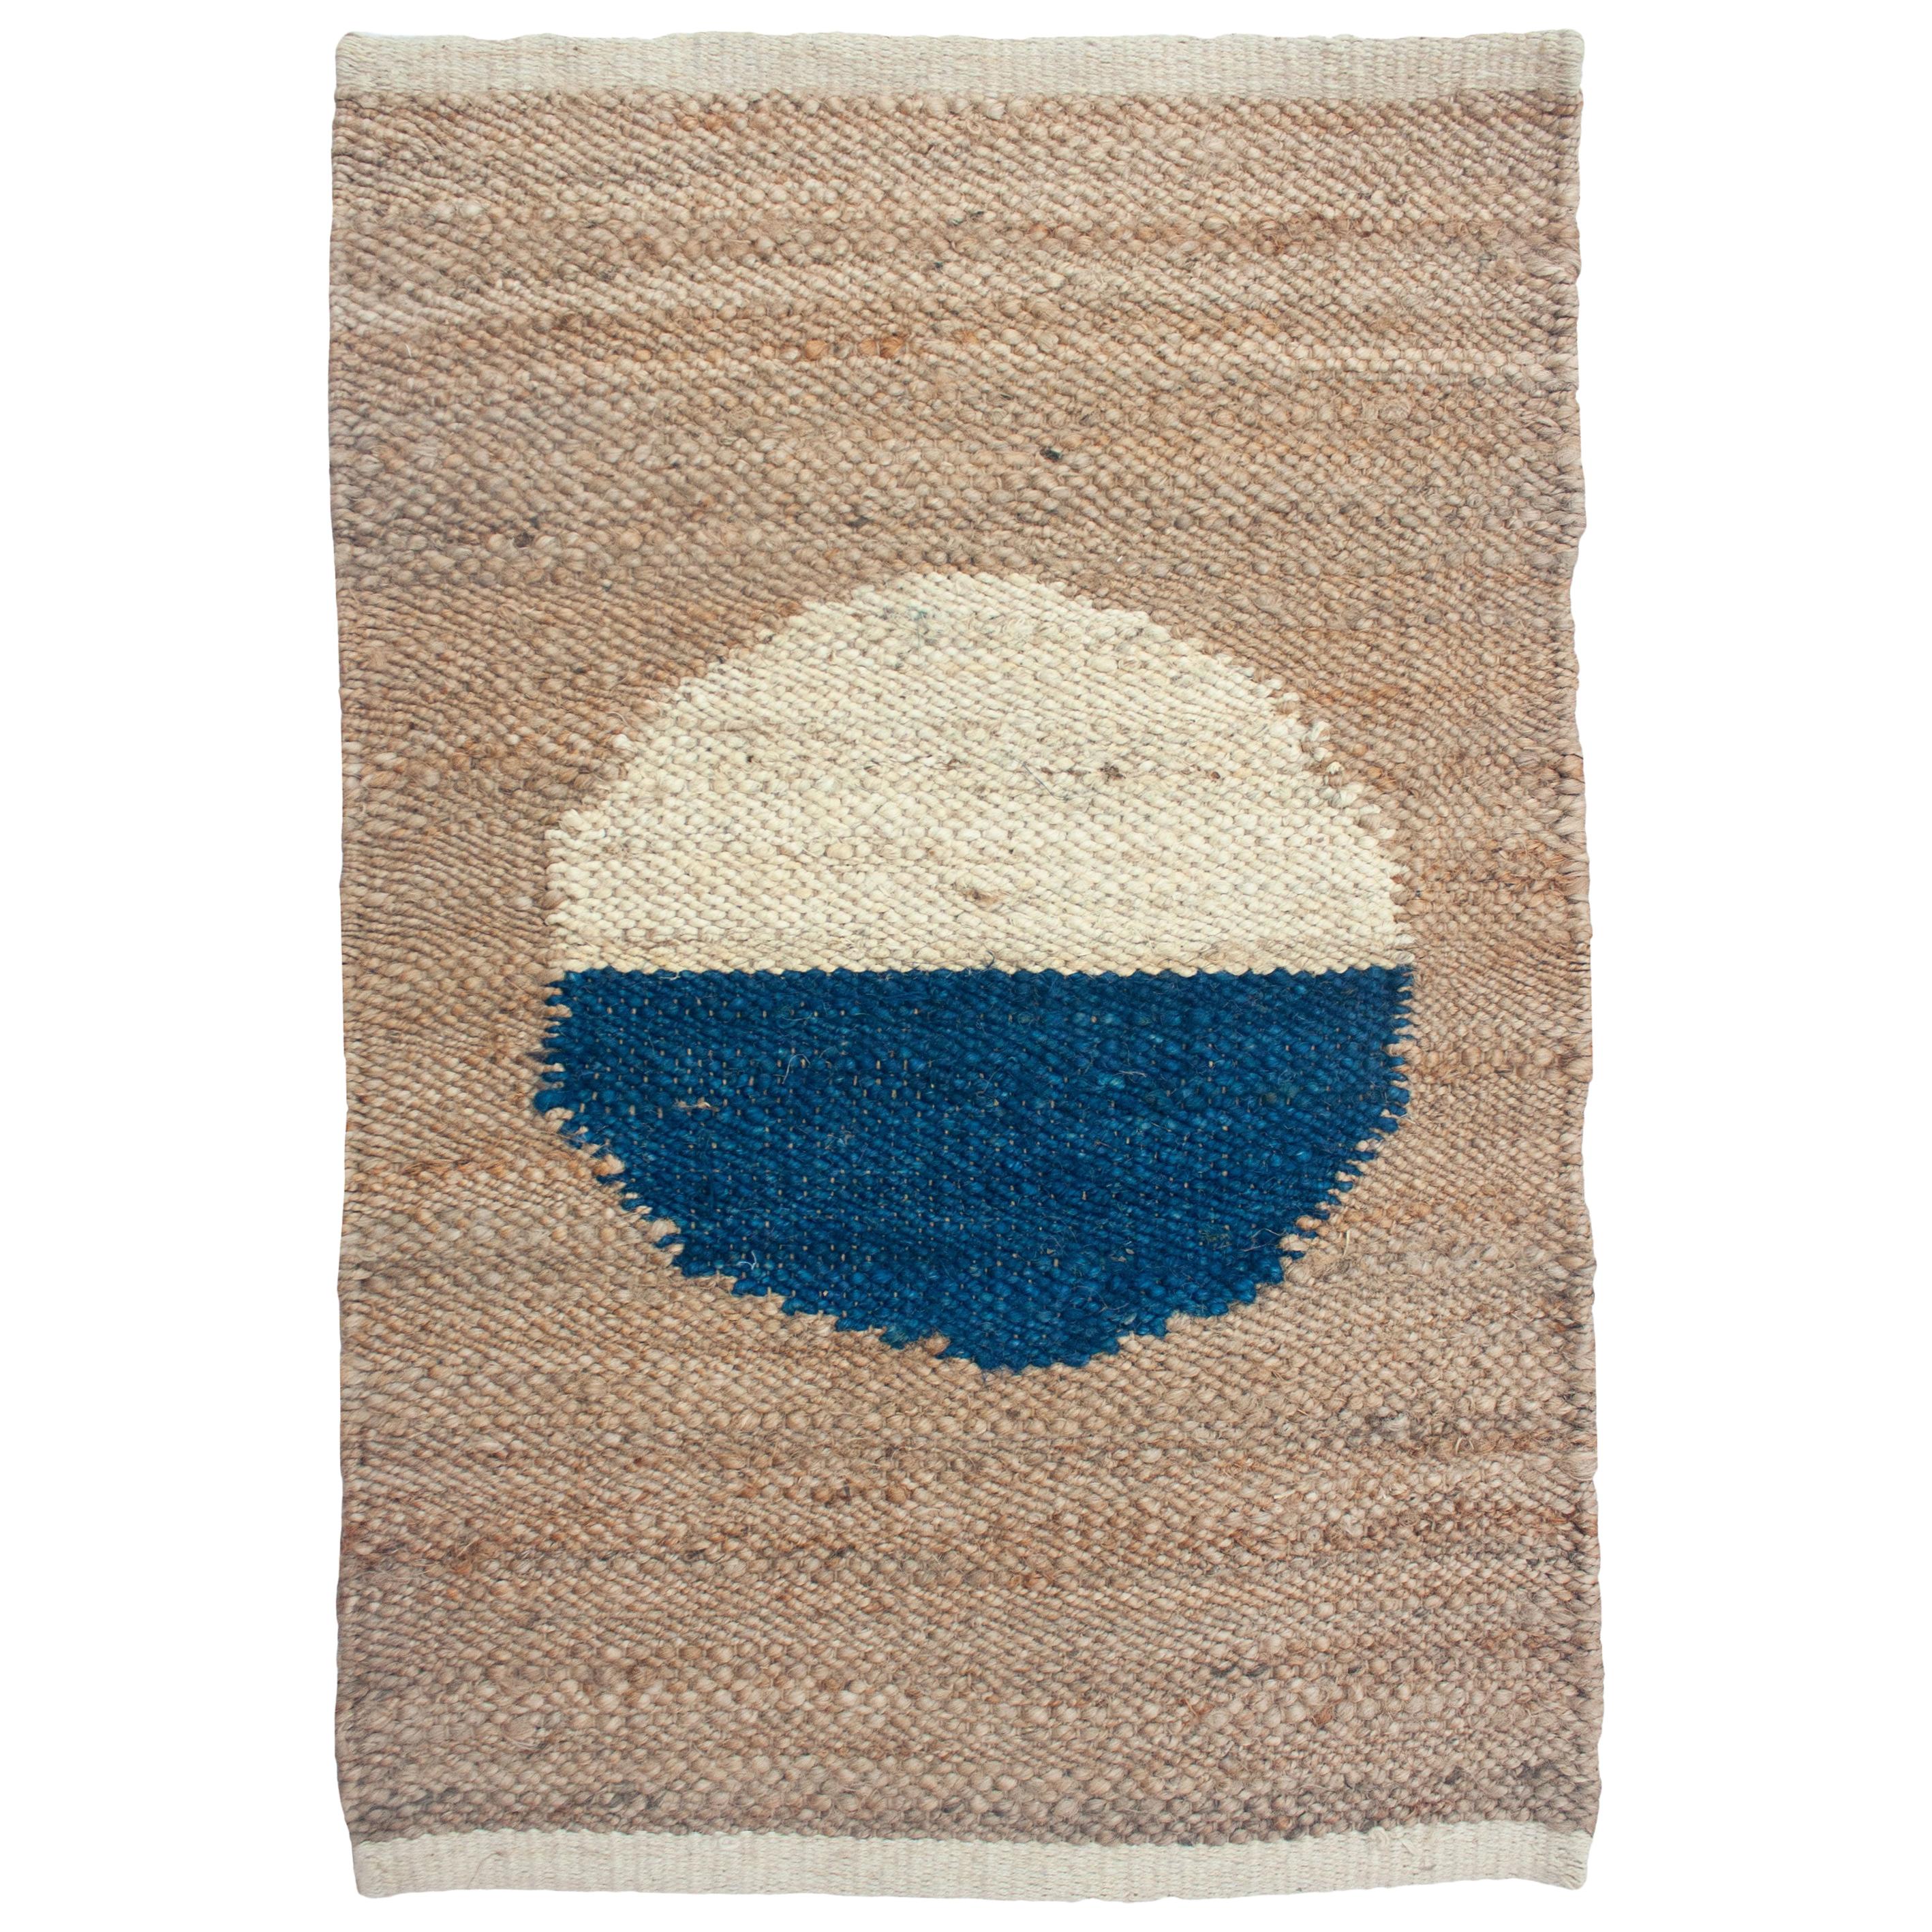 Margeaux Blue and White Circle Handwoven Geometric Jute Rug, Carpet and Durrie